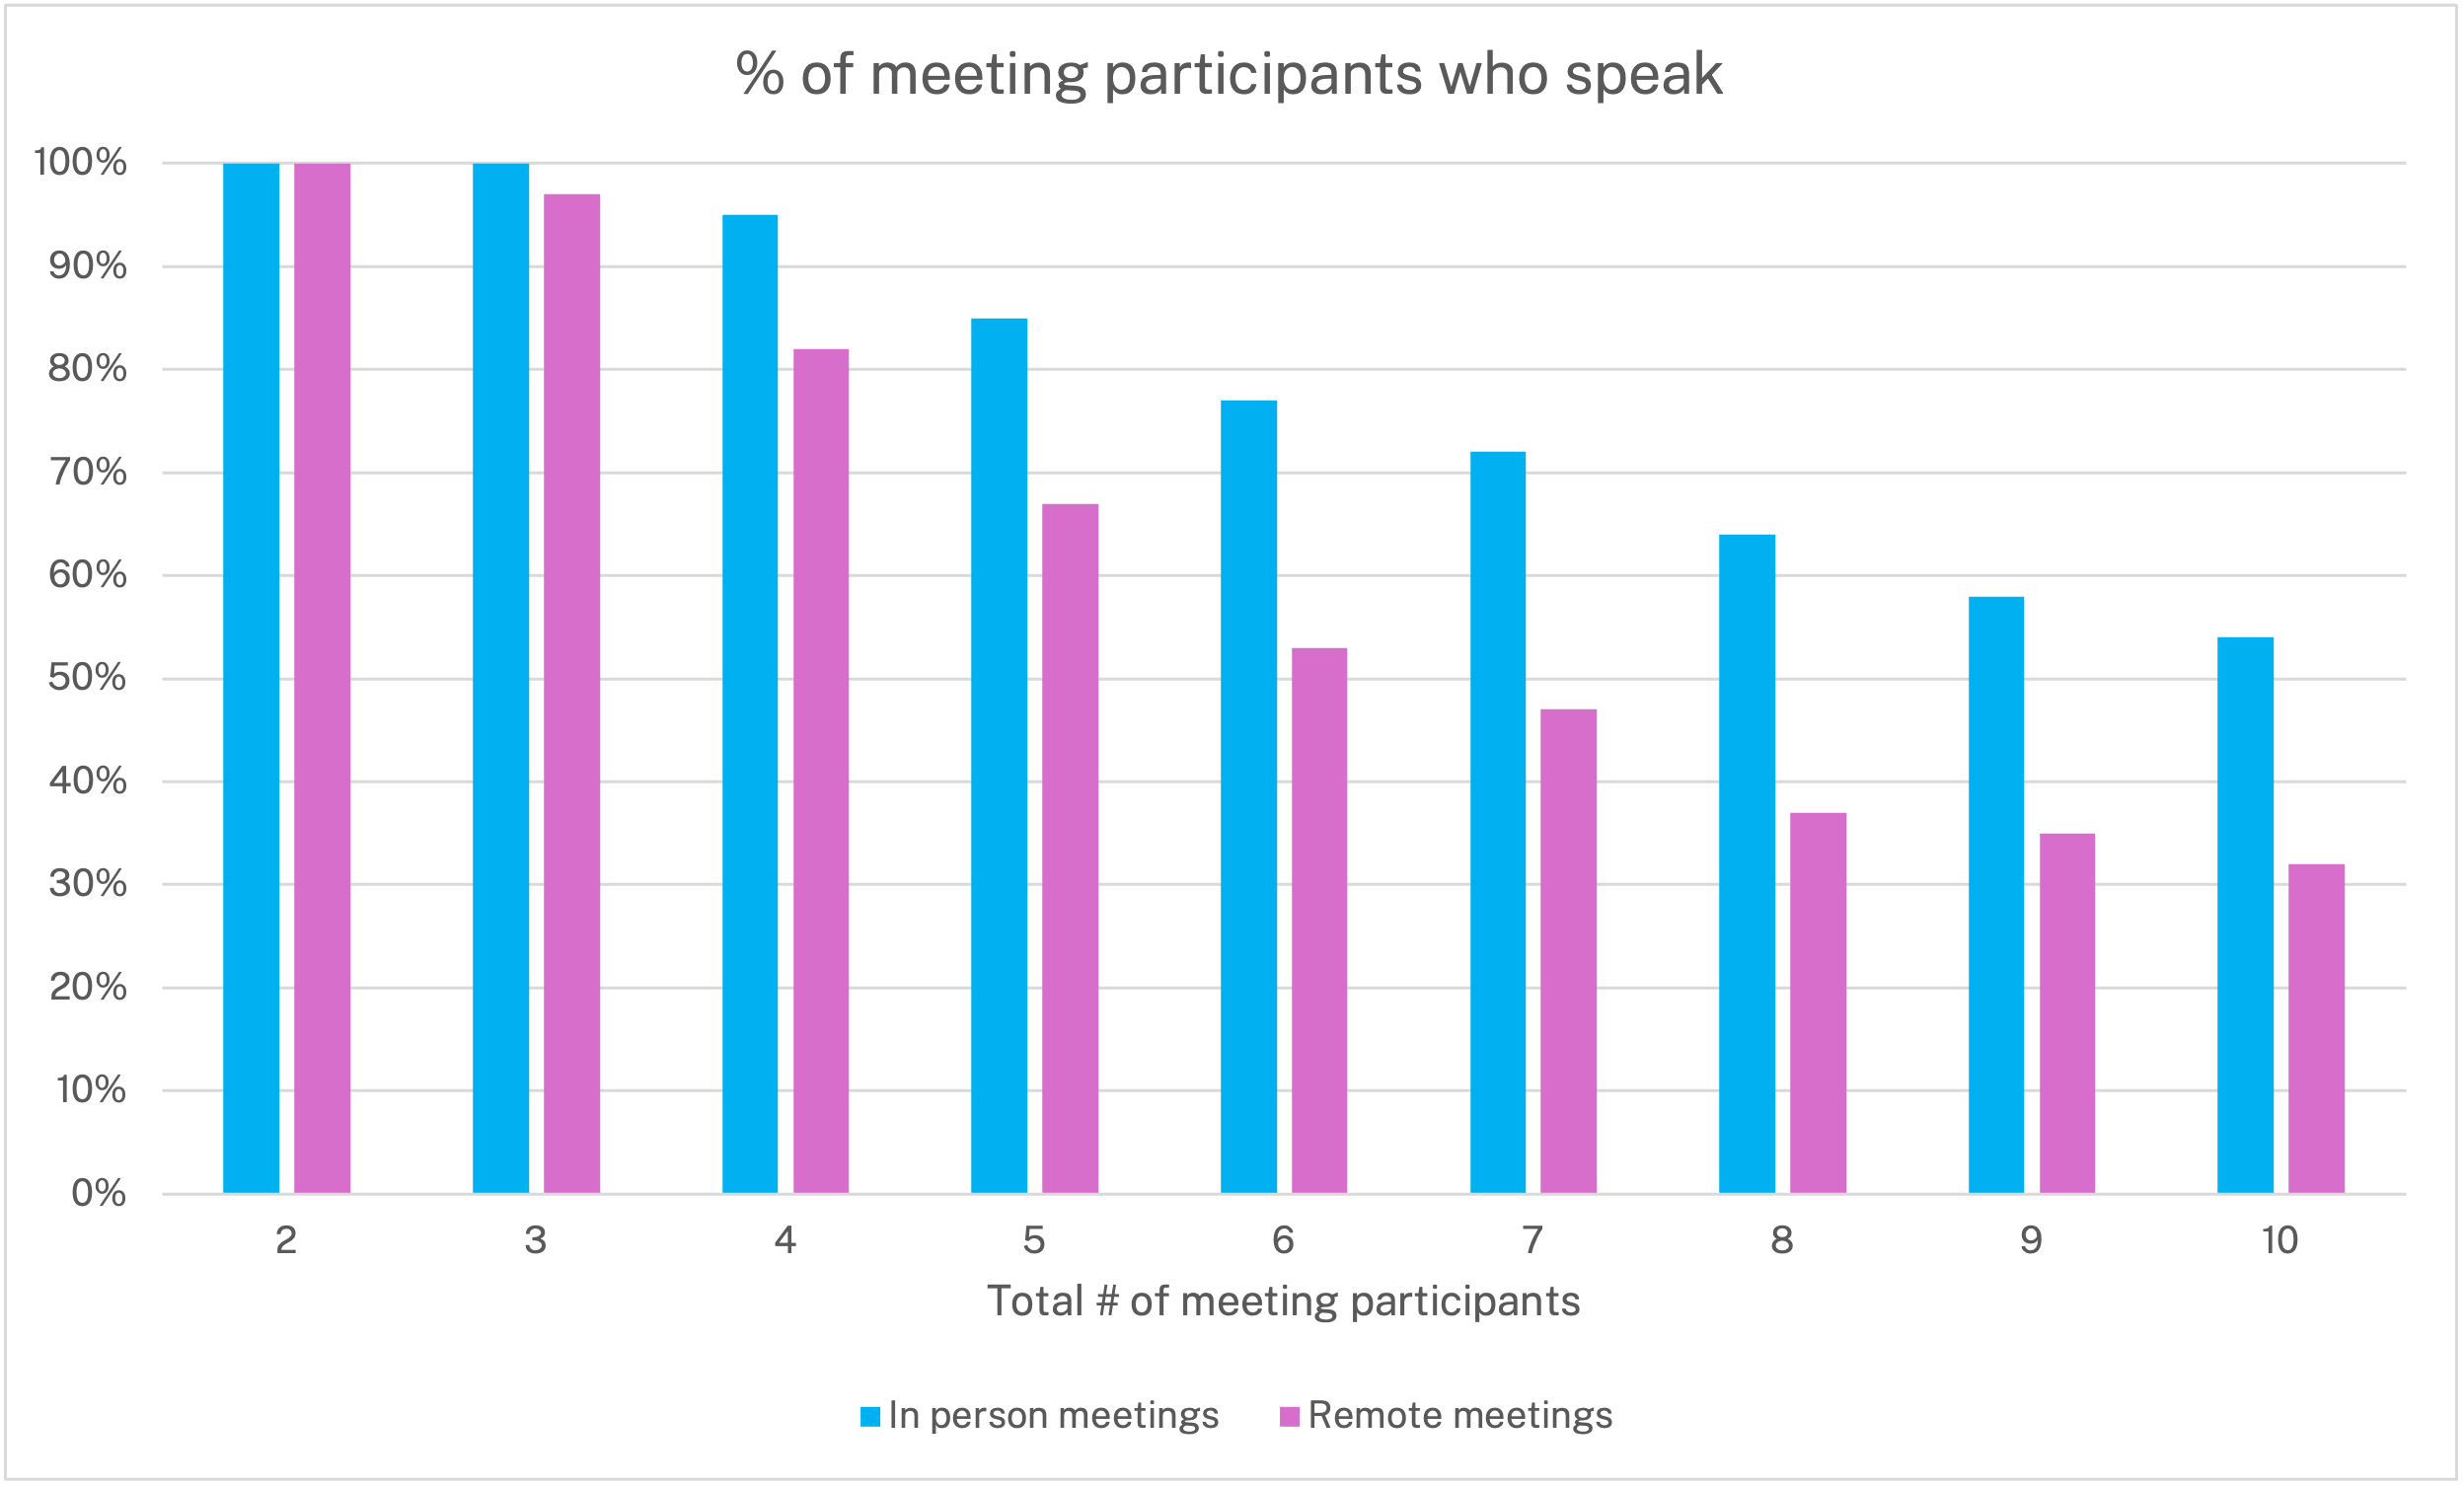 Chart showing % of people who speak in different meeting settings # of participants	In person meetings	Remote meetings 2	100%	100% 3	100%	97% 4	95%	82% 5	85%	67% 6	77%	53% 7	72%	47% 8	64%	37% 9	58%	35% 10	54%	32%